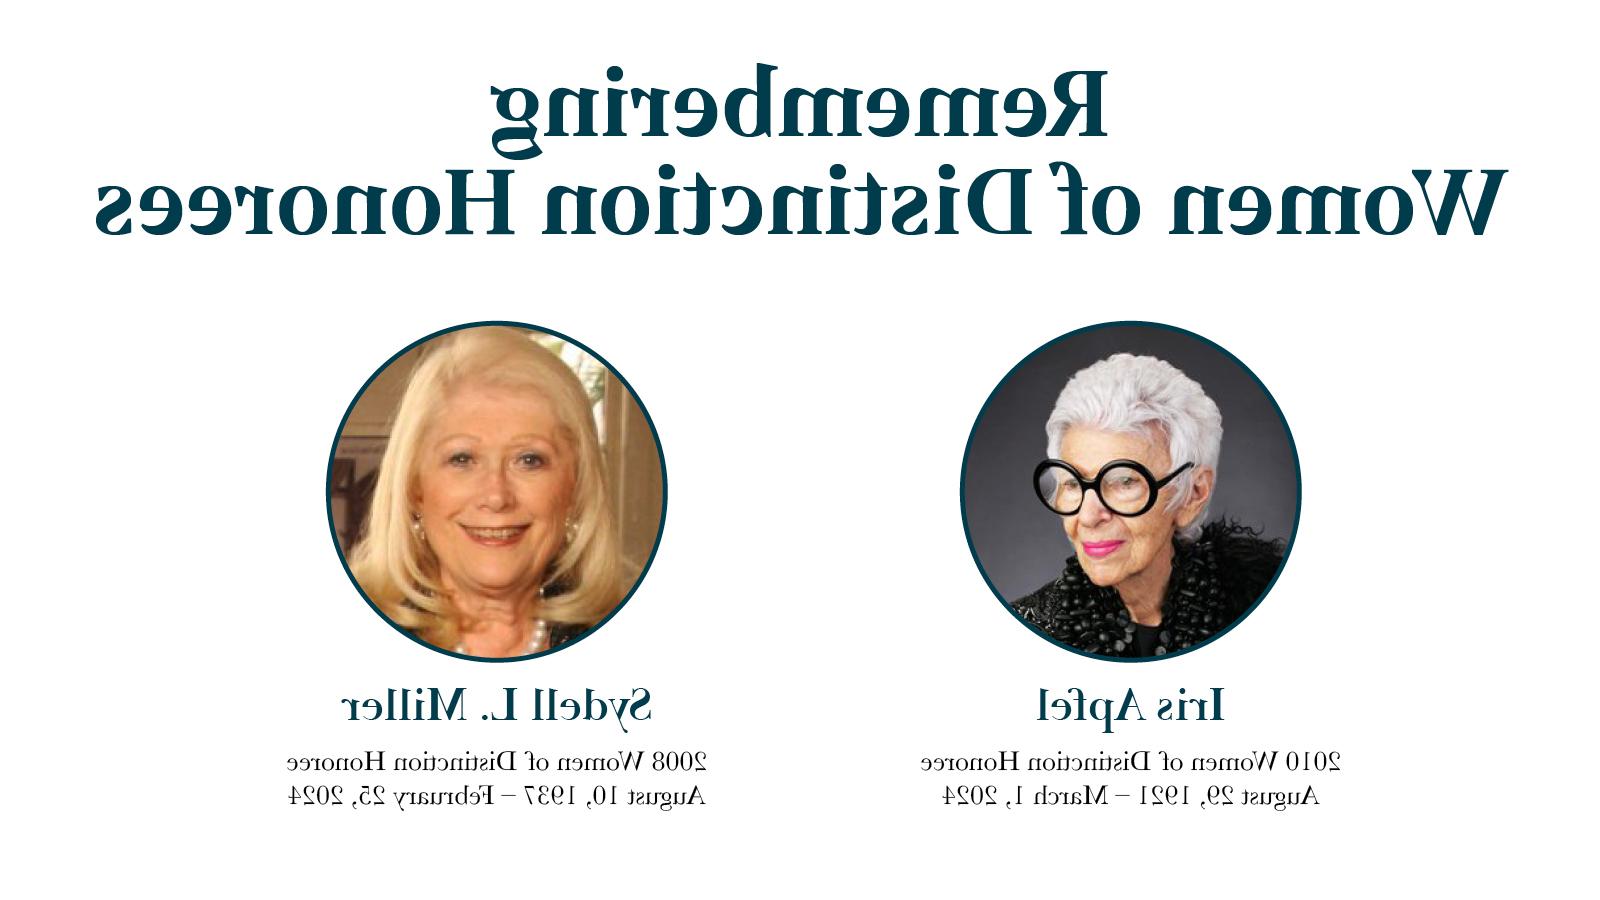 Iris Apfel and Sydell L. Miller